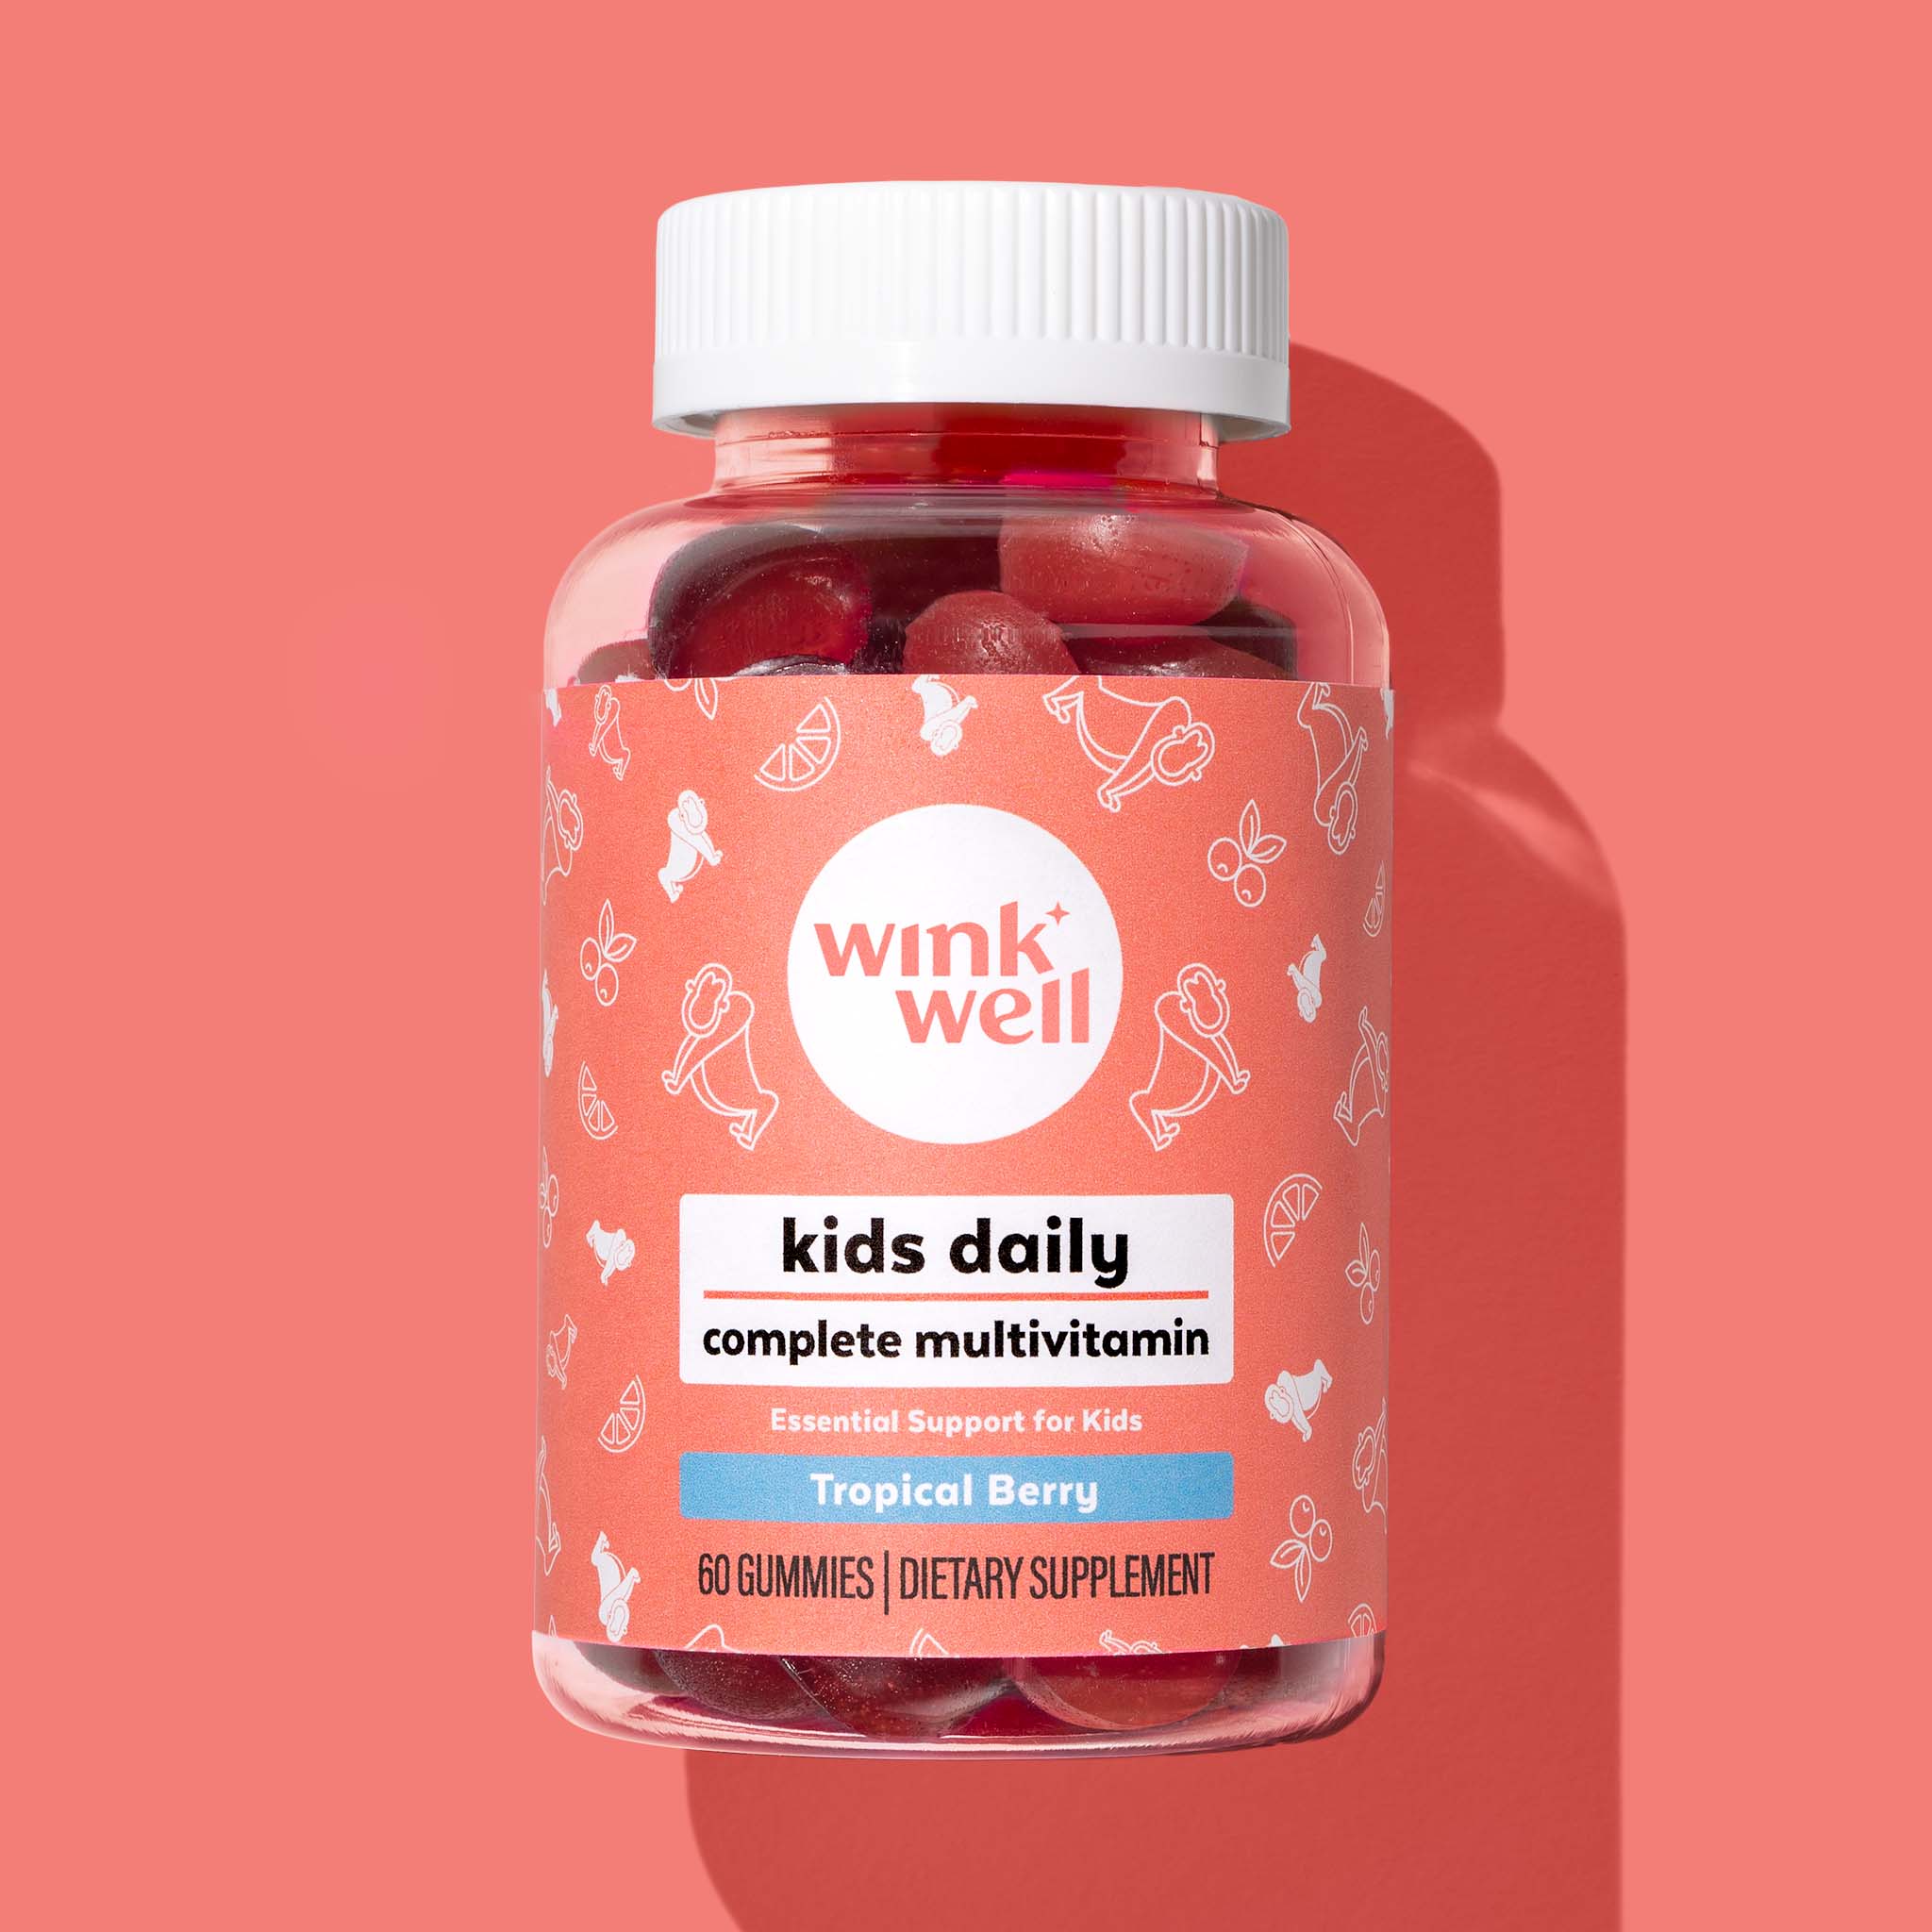 Kids Daily Complete Multivitamin Gummy - Tropical Berry